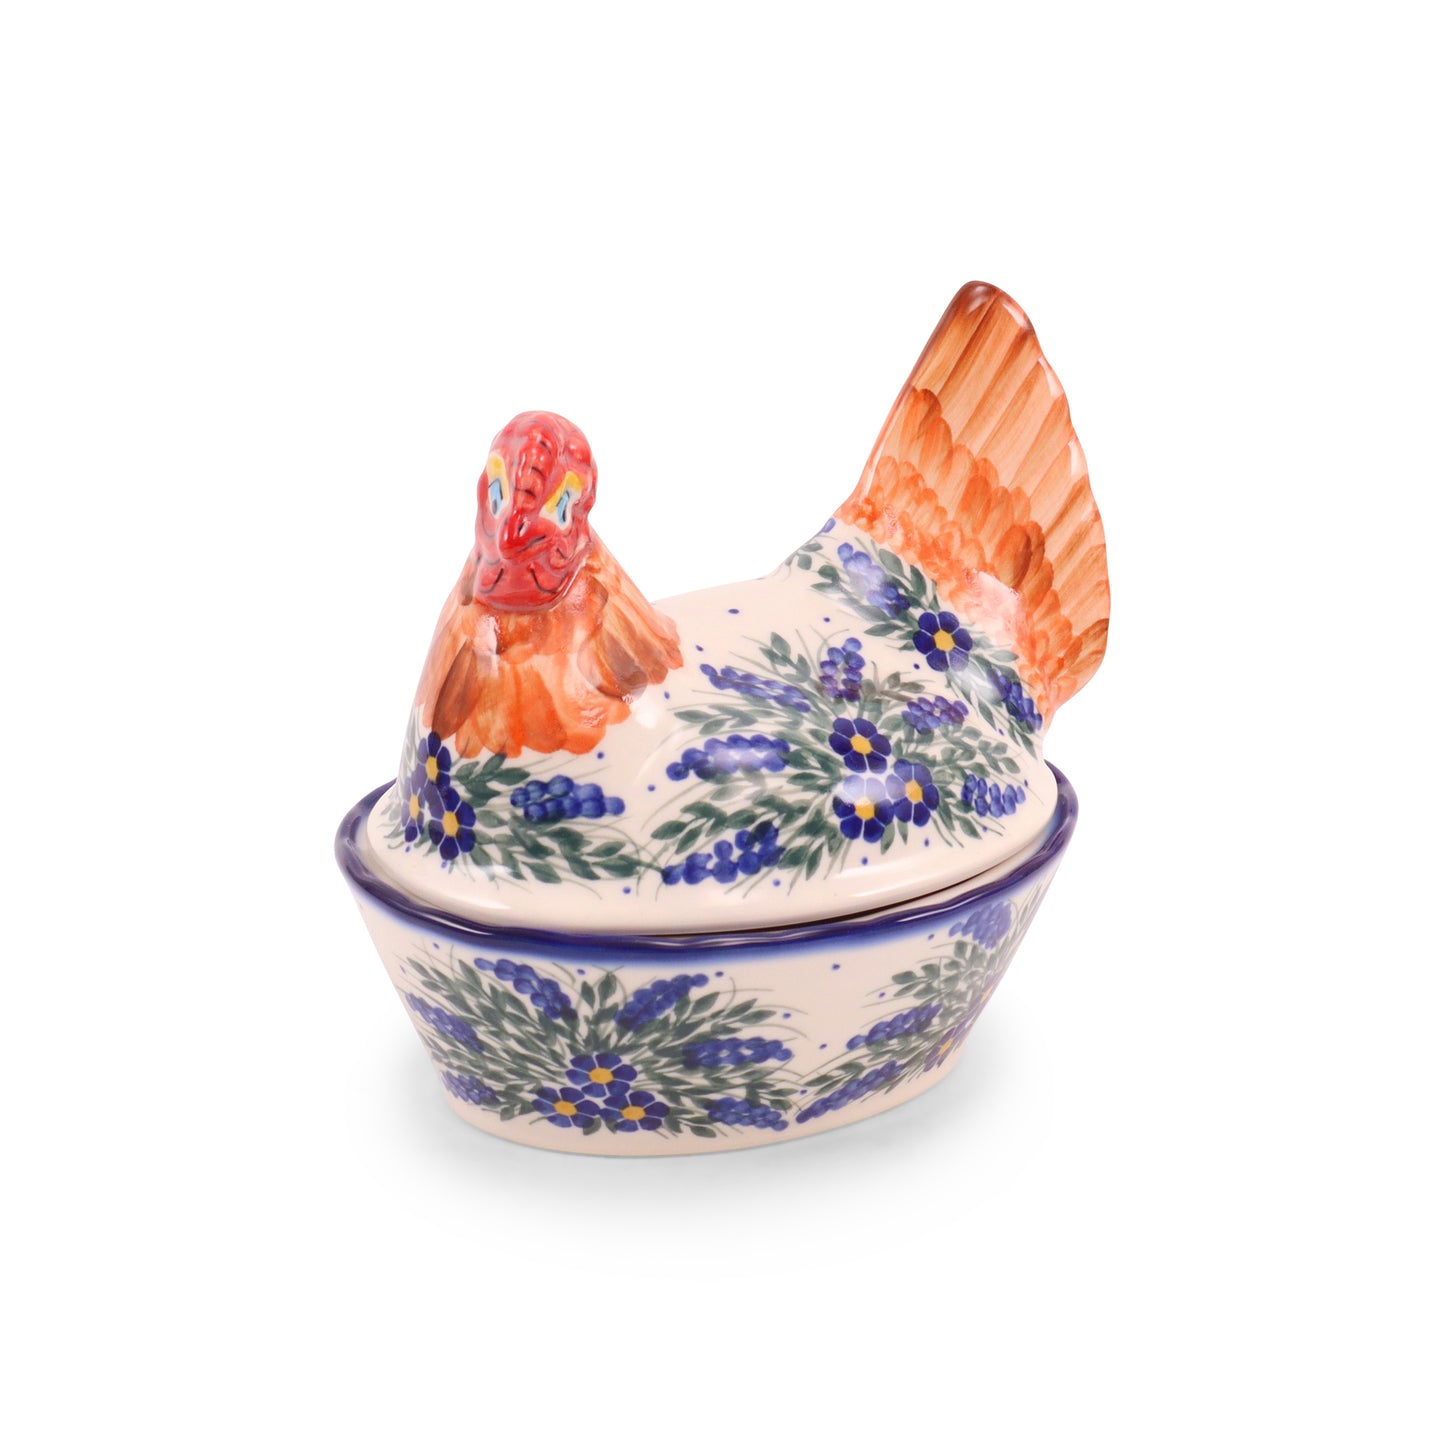 7"x6"x7.5" Hen Container. Pattern: Chelsea